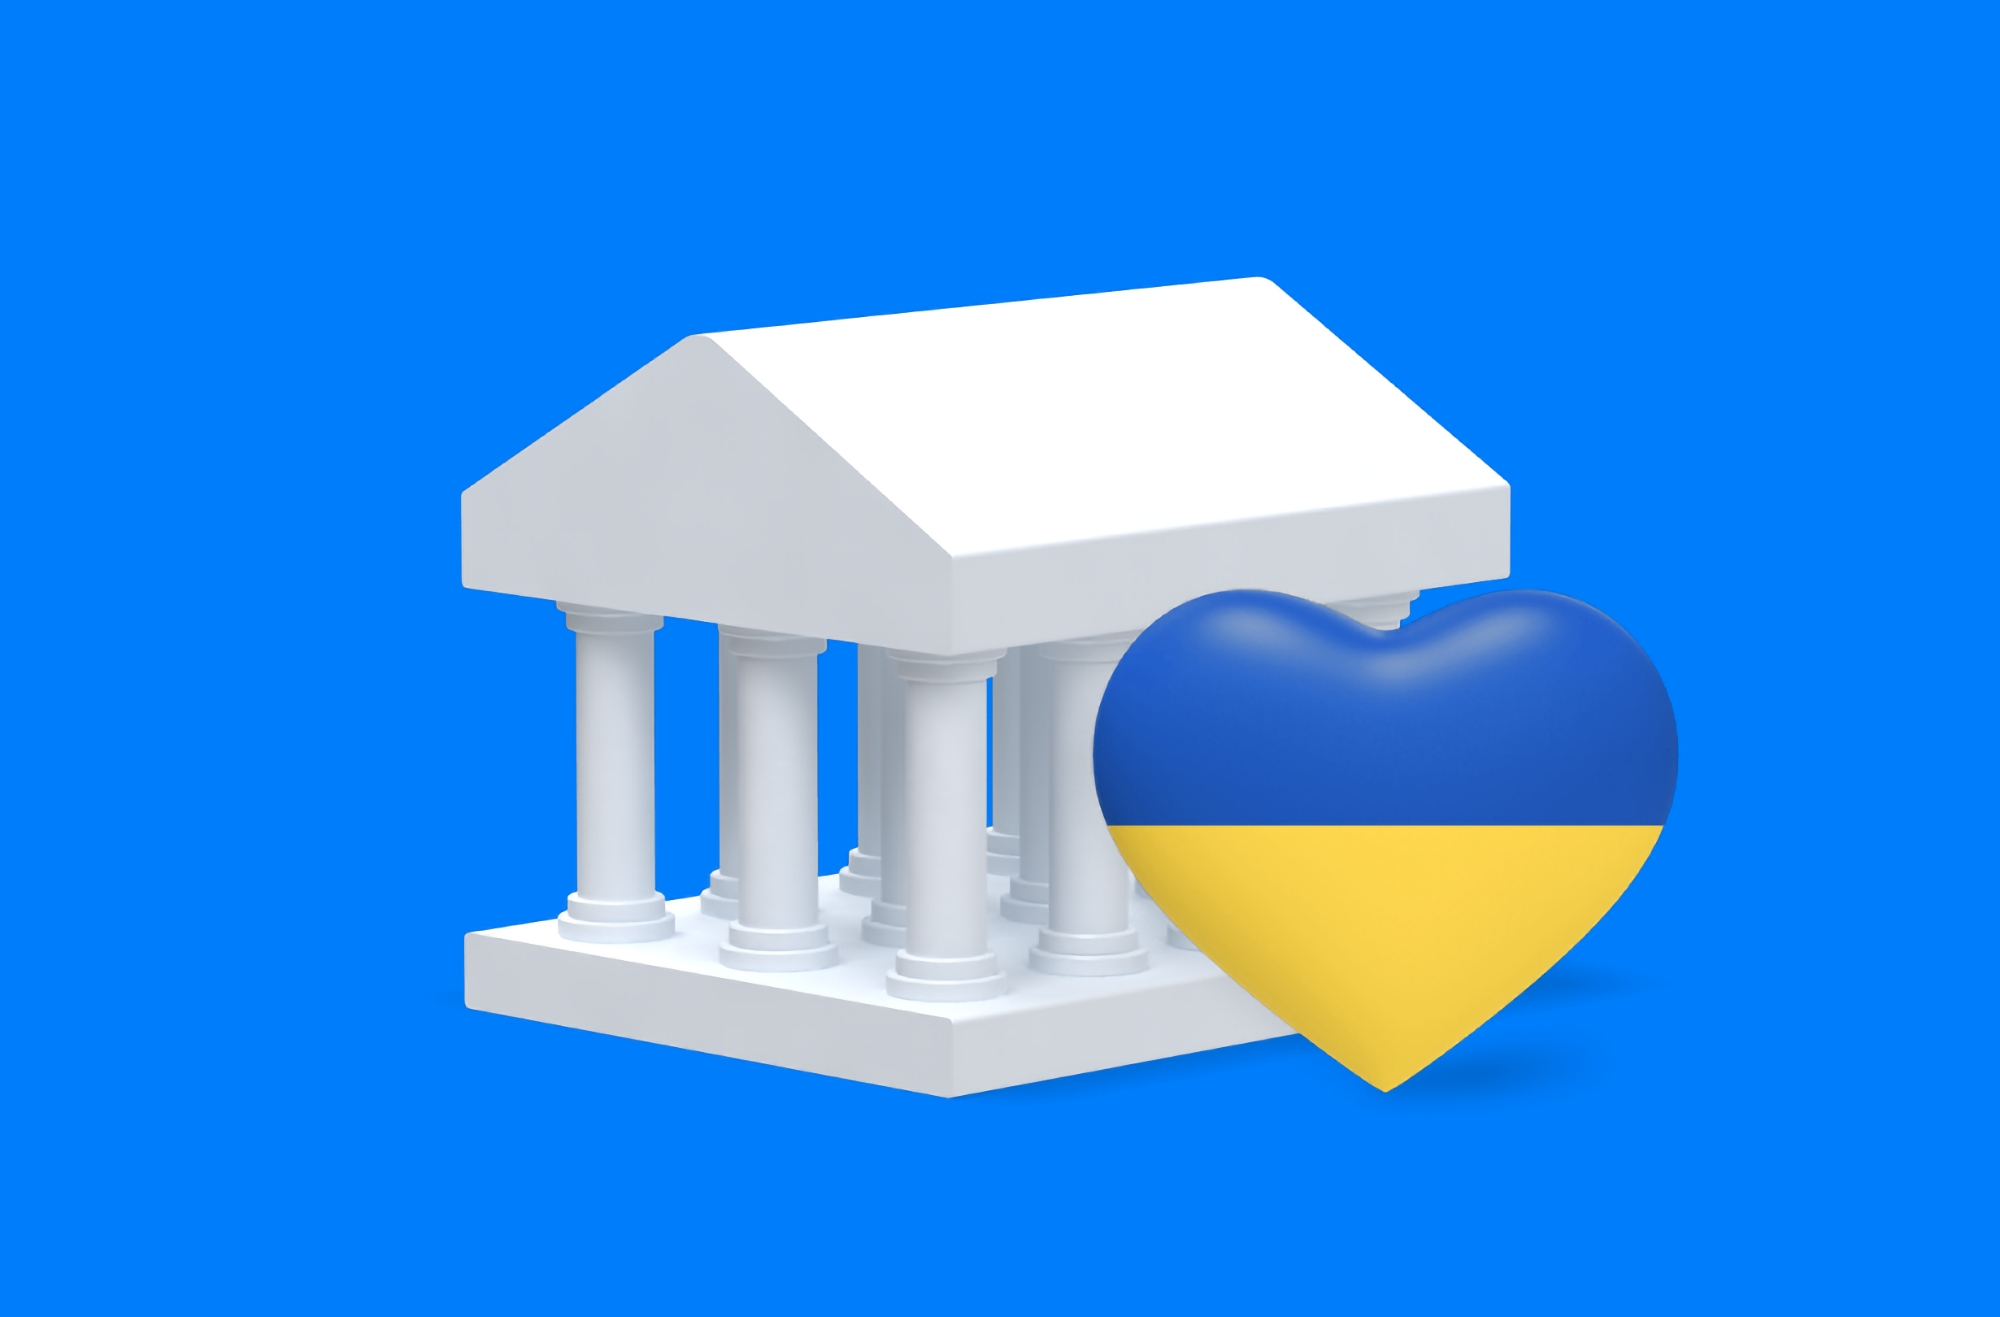 Internet bank Revolut is available for Ukrainian refugees in Europe